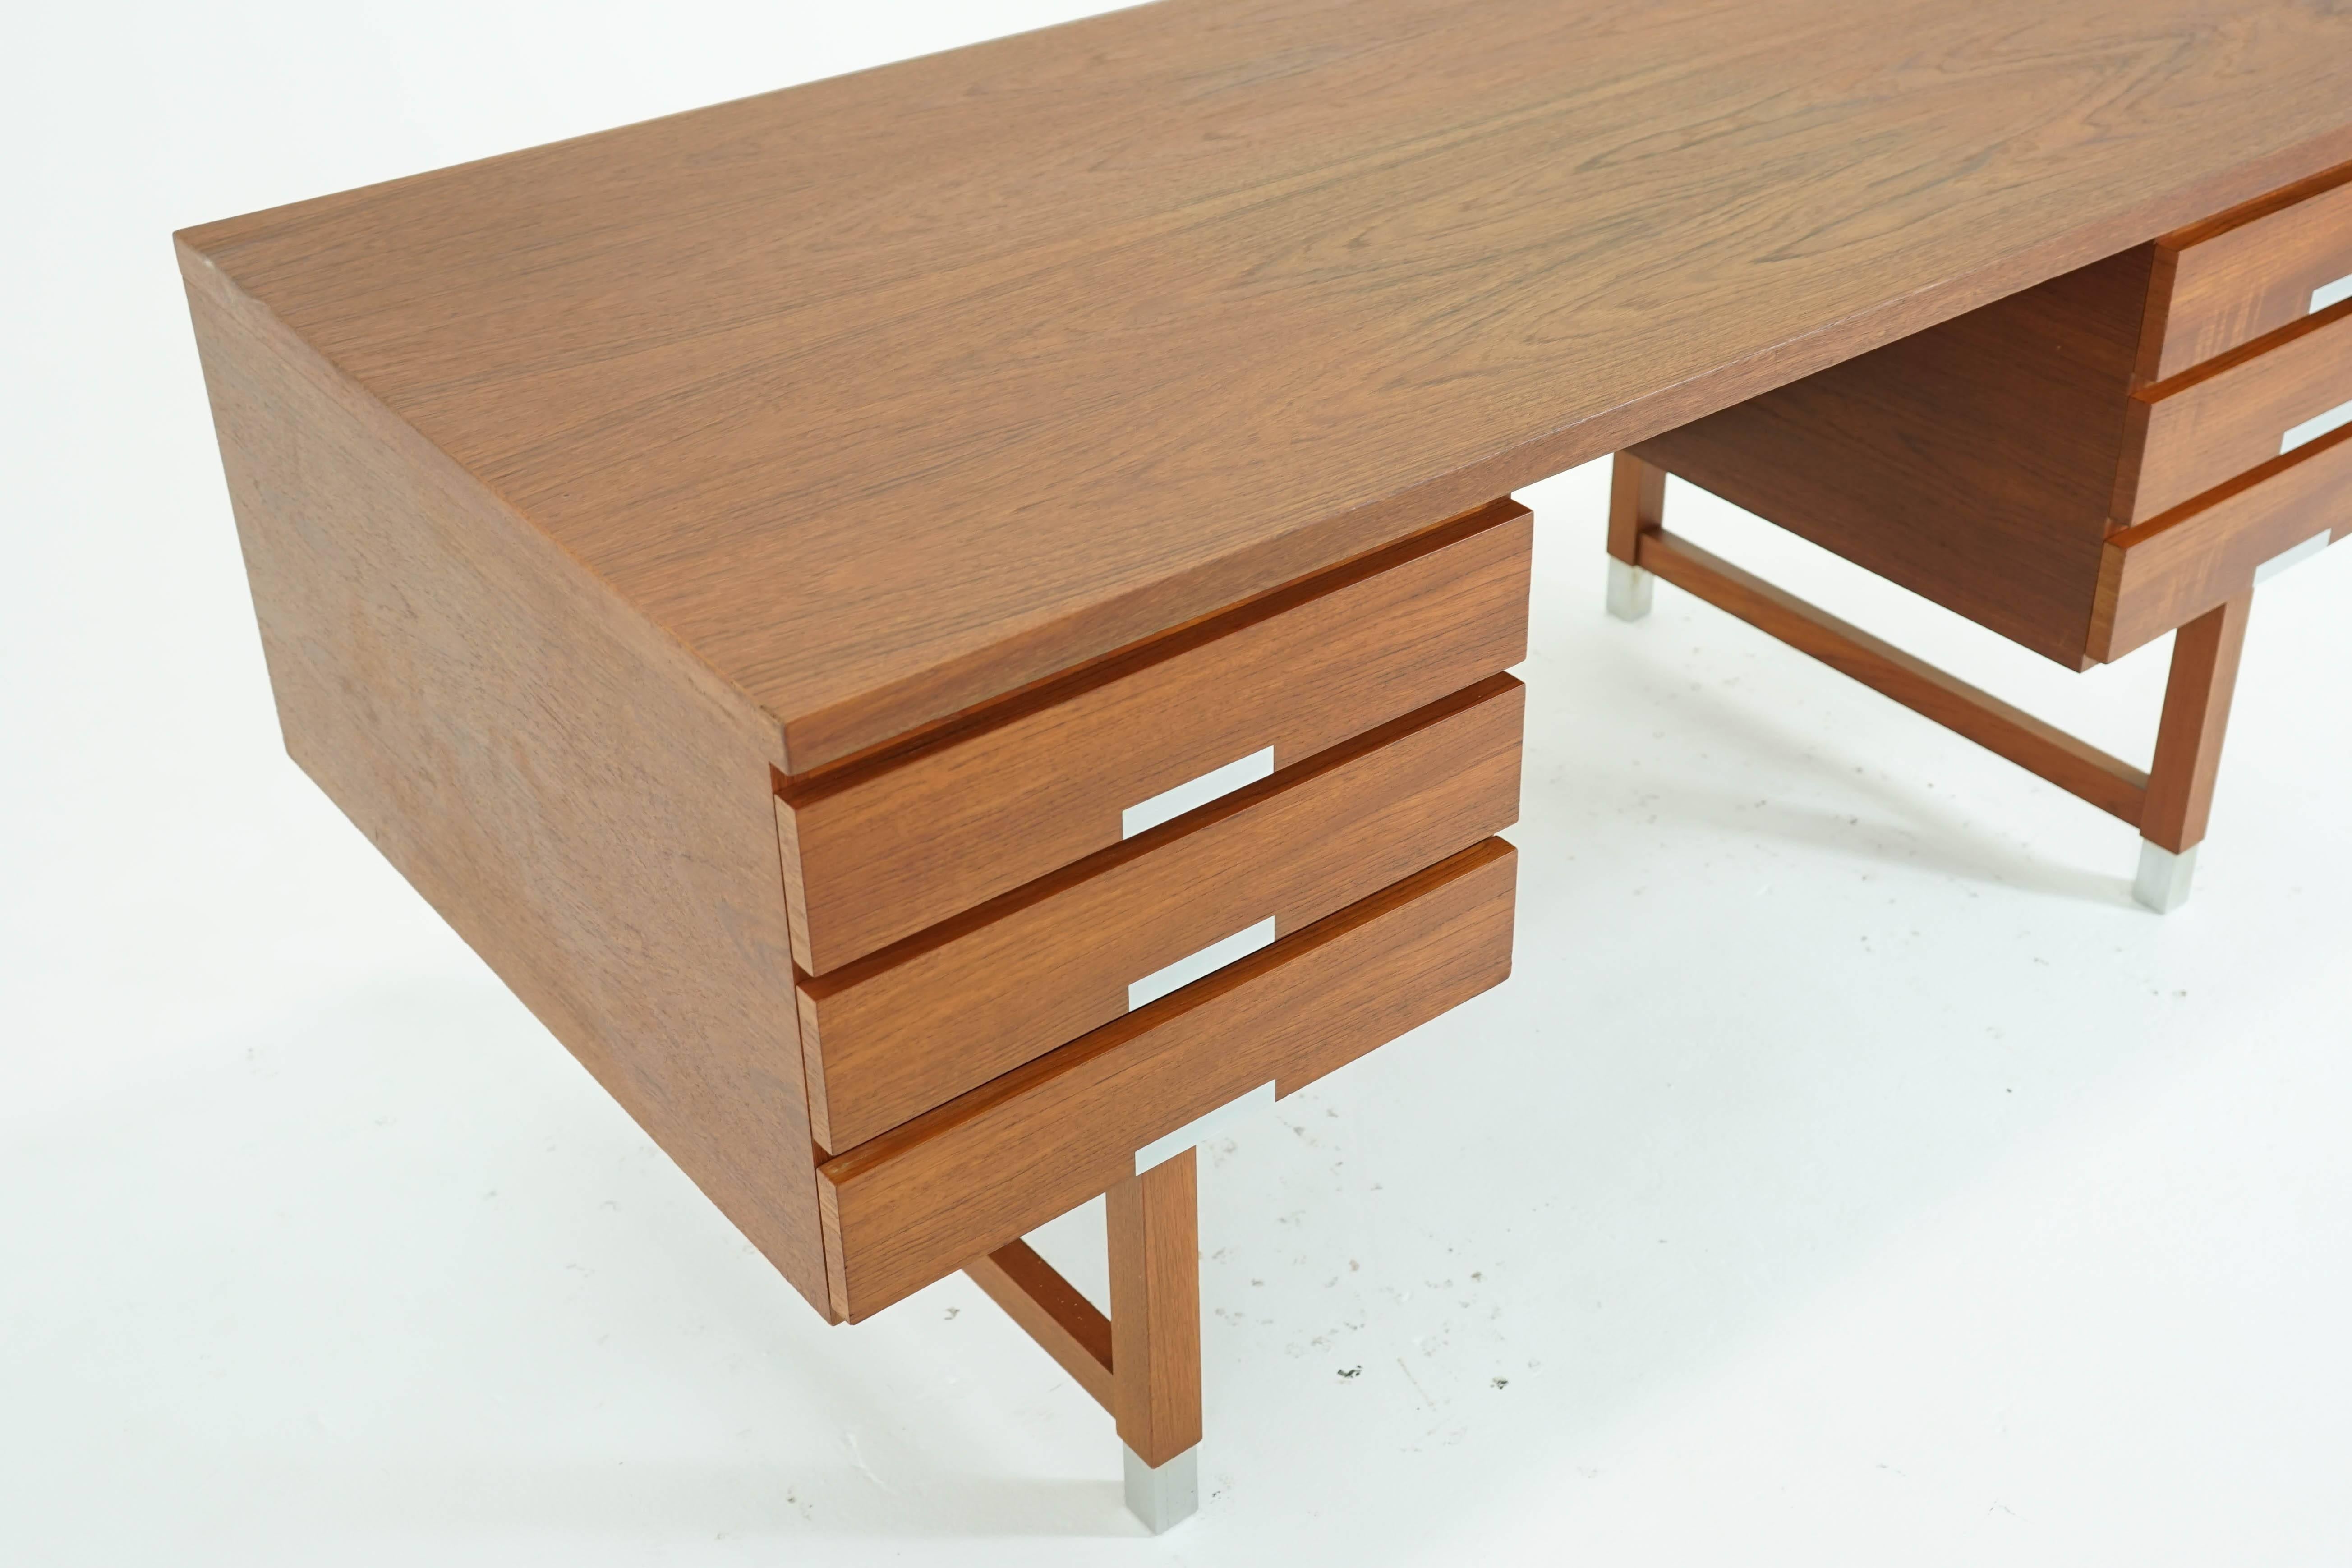 A modern solid teak and veneer desk by Kai Kristiansen. Removable legs with sabots, finished front with shelving/storage for display. Very good original condition.